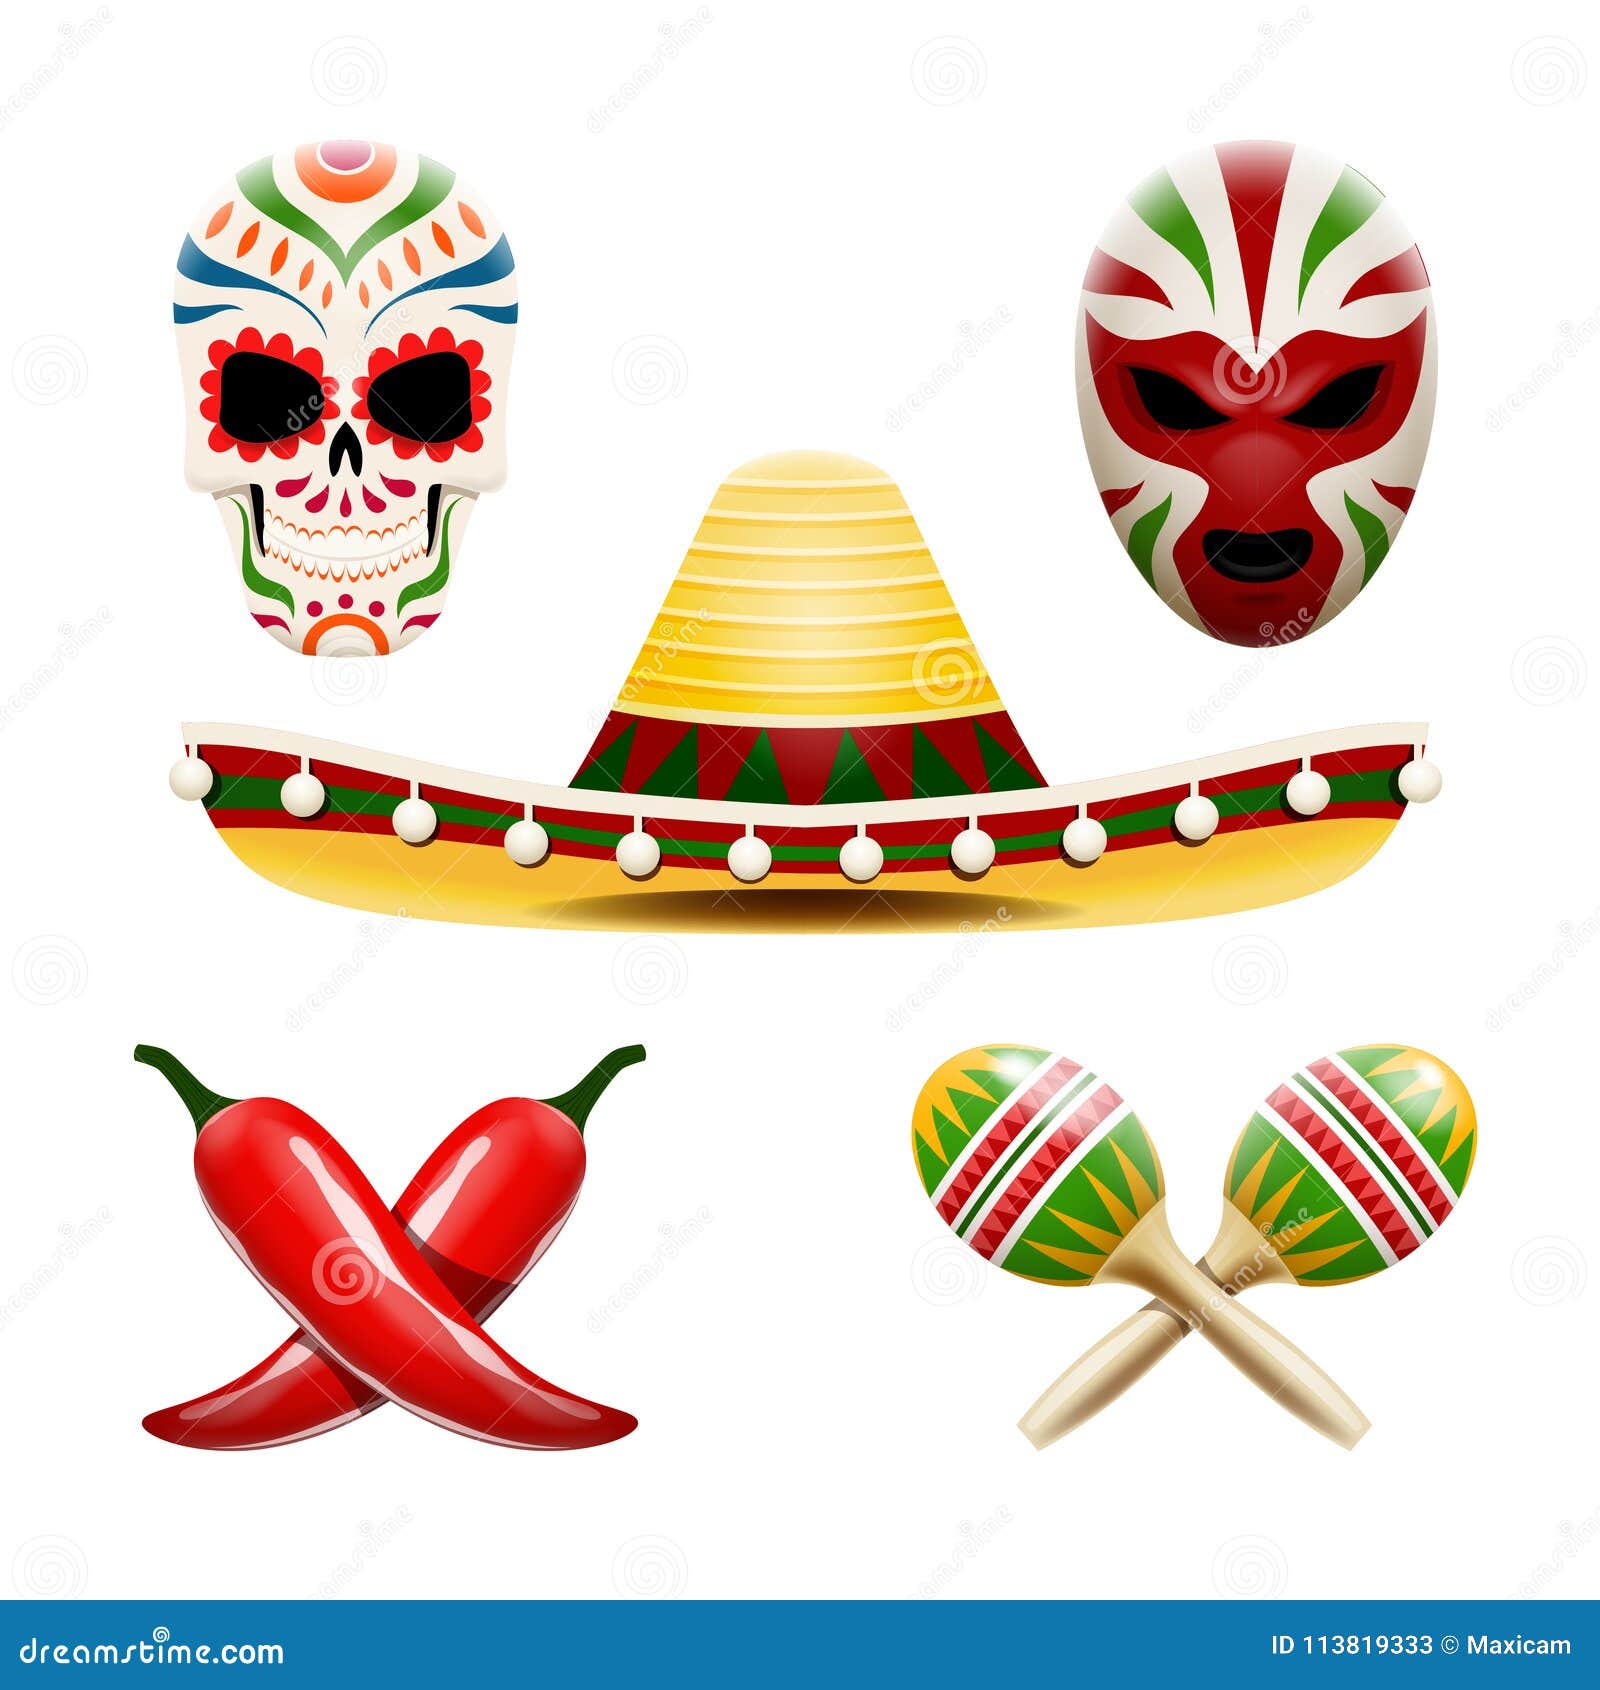  set of mexican s such as sombrero, maracas, chili peppers, sugar skull calavera and wrestler mask.